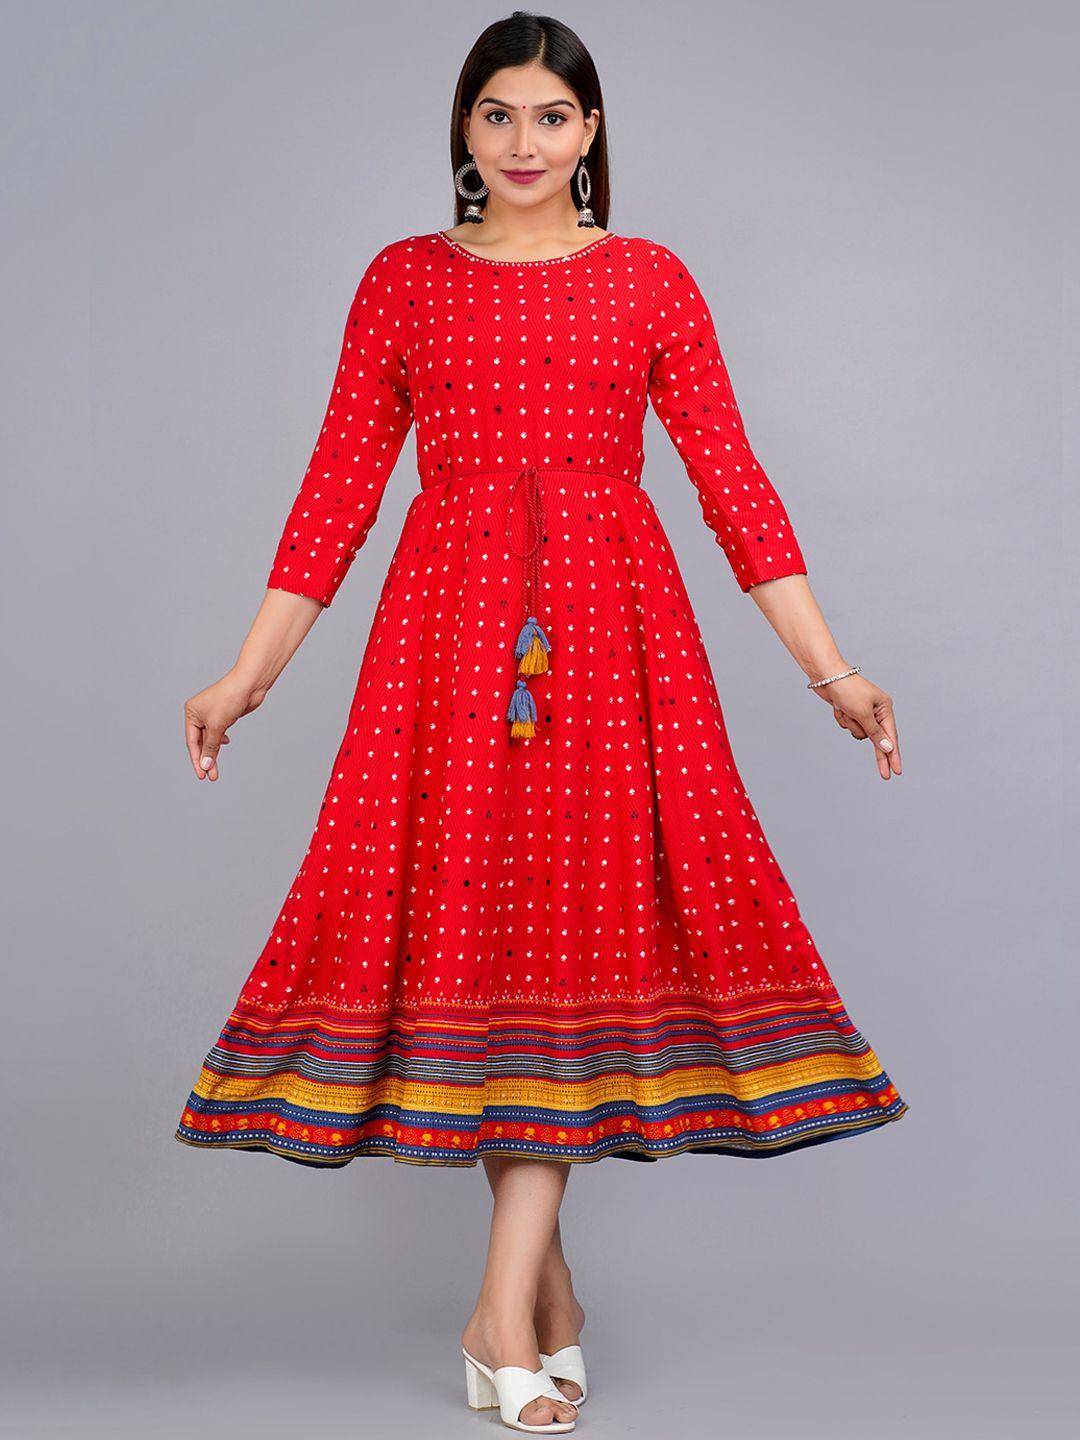 here&now-women-red-&-white-printed-maxi-ethnic-dresses